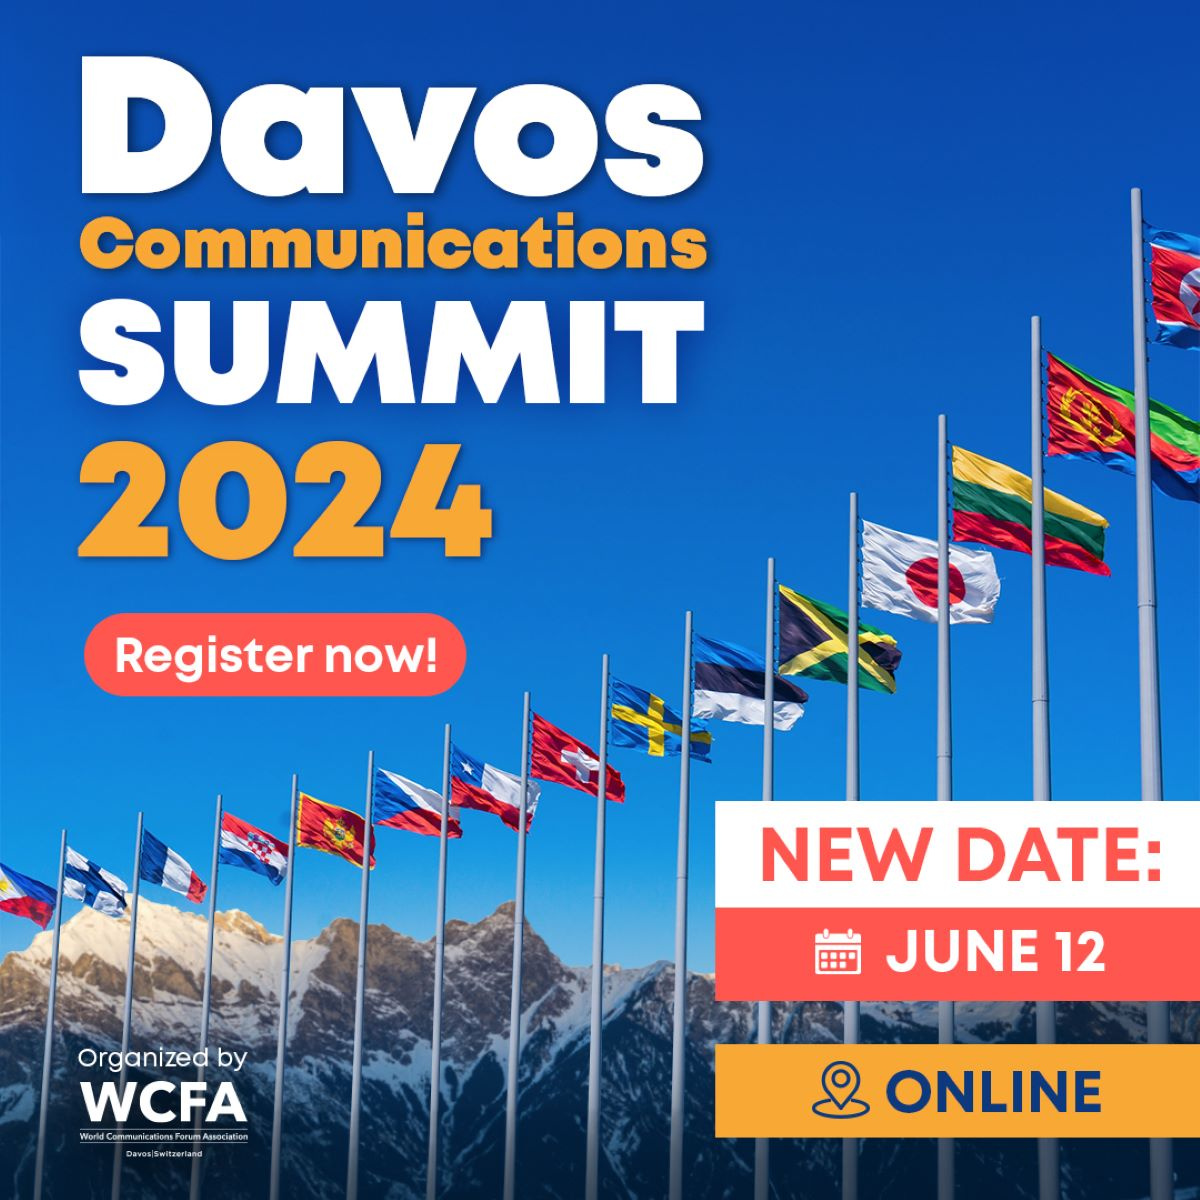 NEW: Davos Communications Summit 2024 Goes Online on June 12